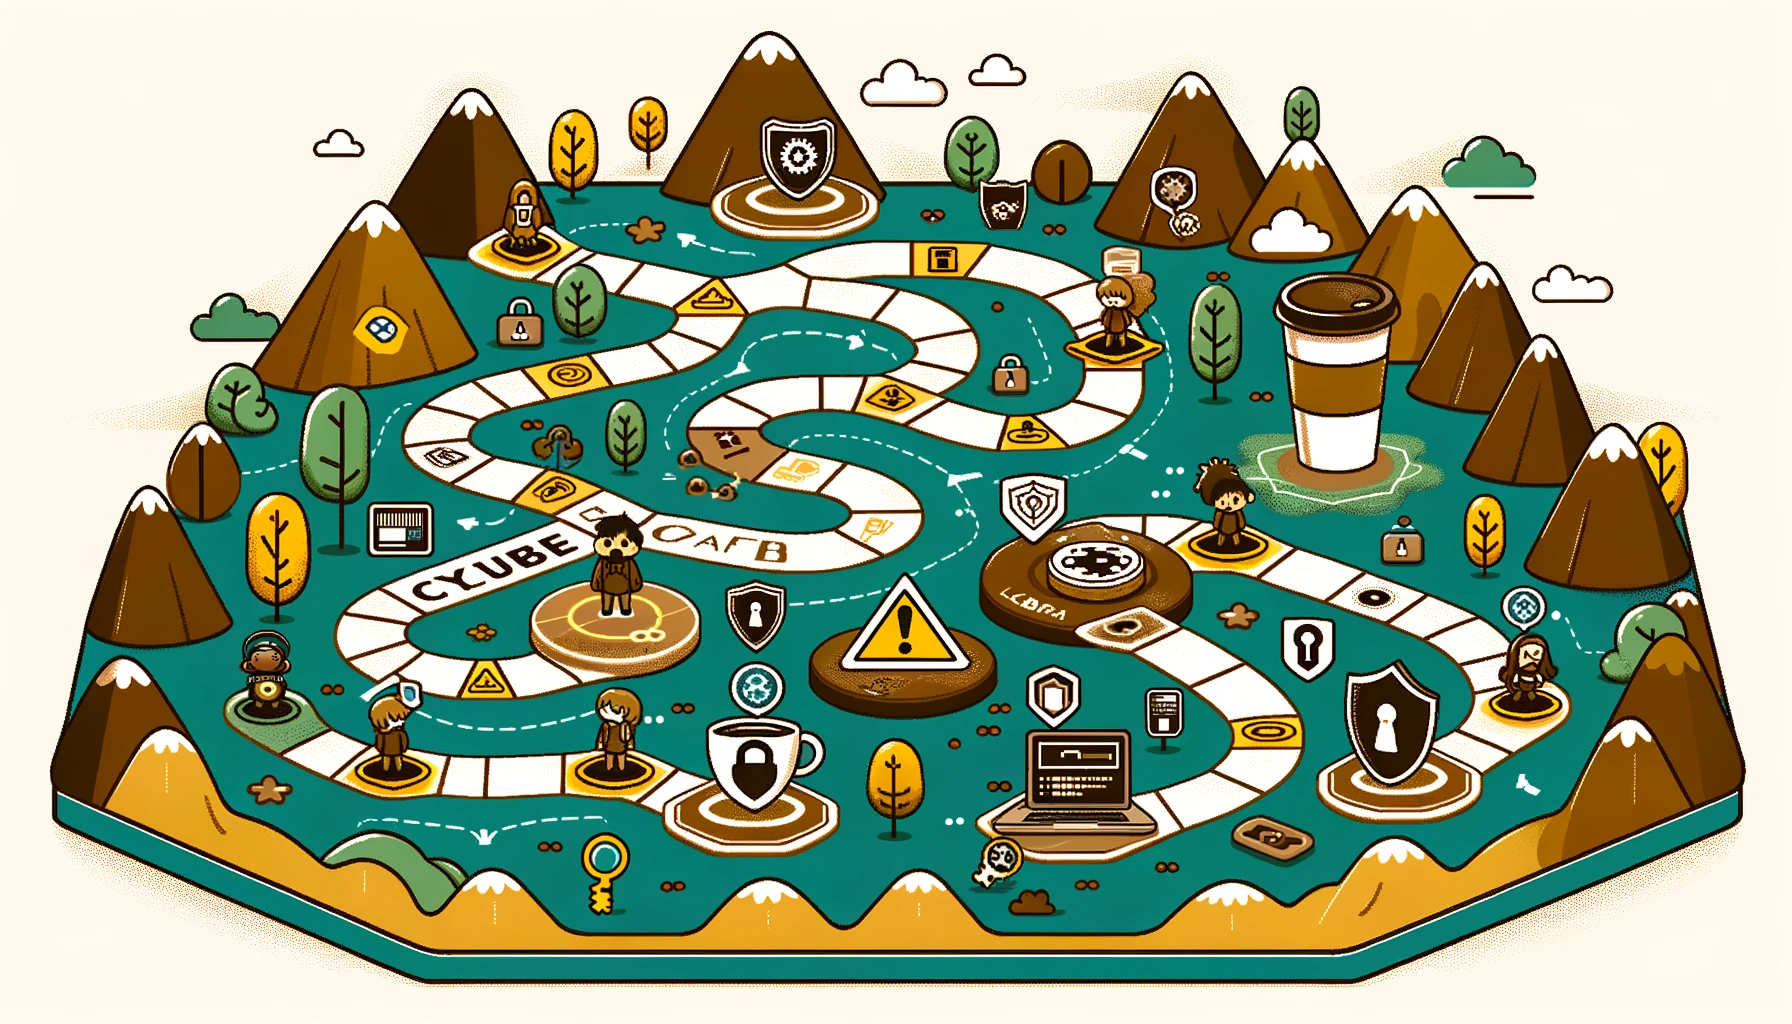 Vector illustration in a cute, simplified style showcasing an abstract cybersecurity learning path represented as a board game. The path is winding through a landscape of coffee-toned hills dotted with yellow and green accents, signifying different levels of cybersecurity challenges. Each 'station' on the path is marked with icons like locks, shields, and keys. Along the path, there are tiny chibi characters representing learners, each with a unique cyber-themed outfit, some holding shields with firewalls, others with magnifying glasses for scrutiny, all with a backdrop of a clear, digital sky.